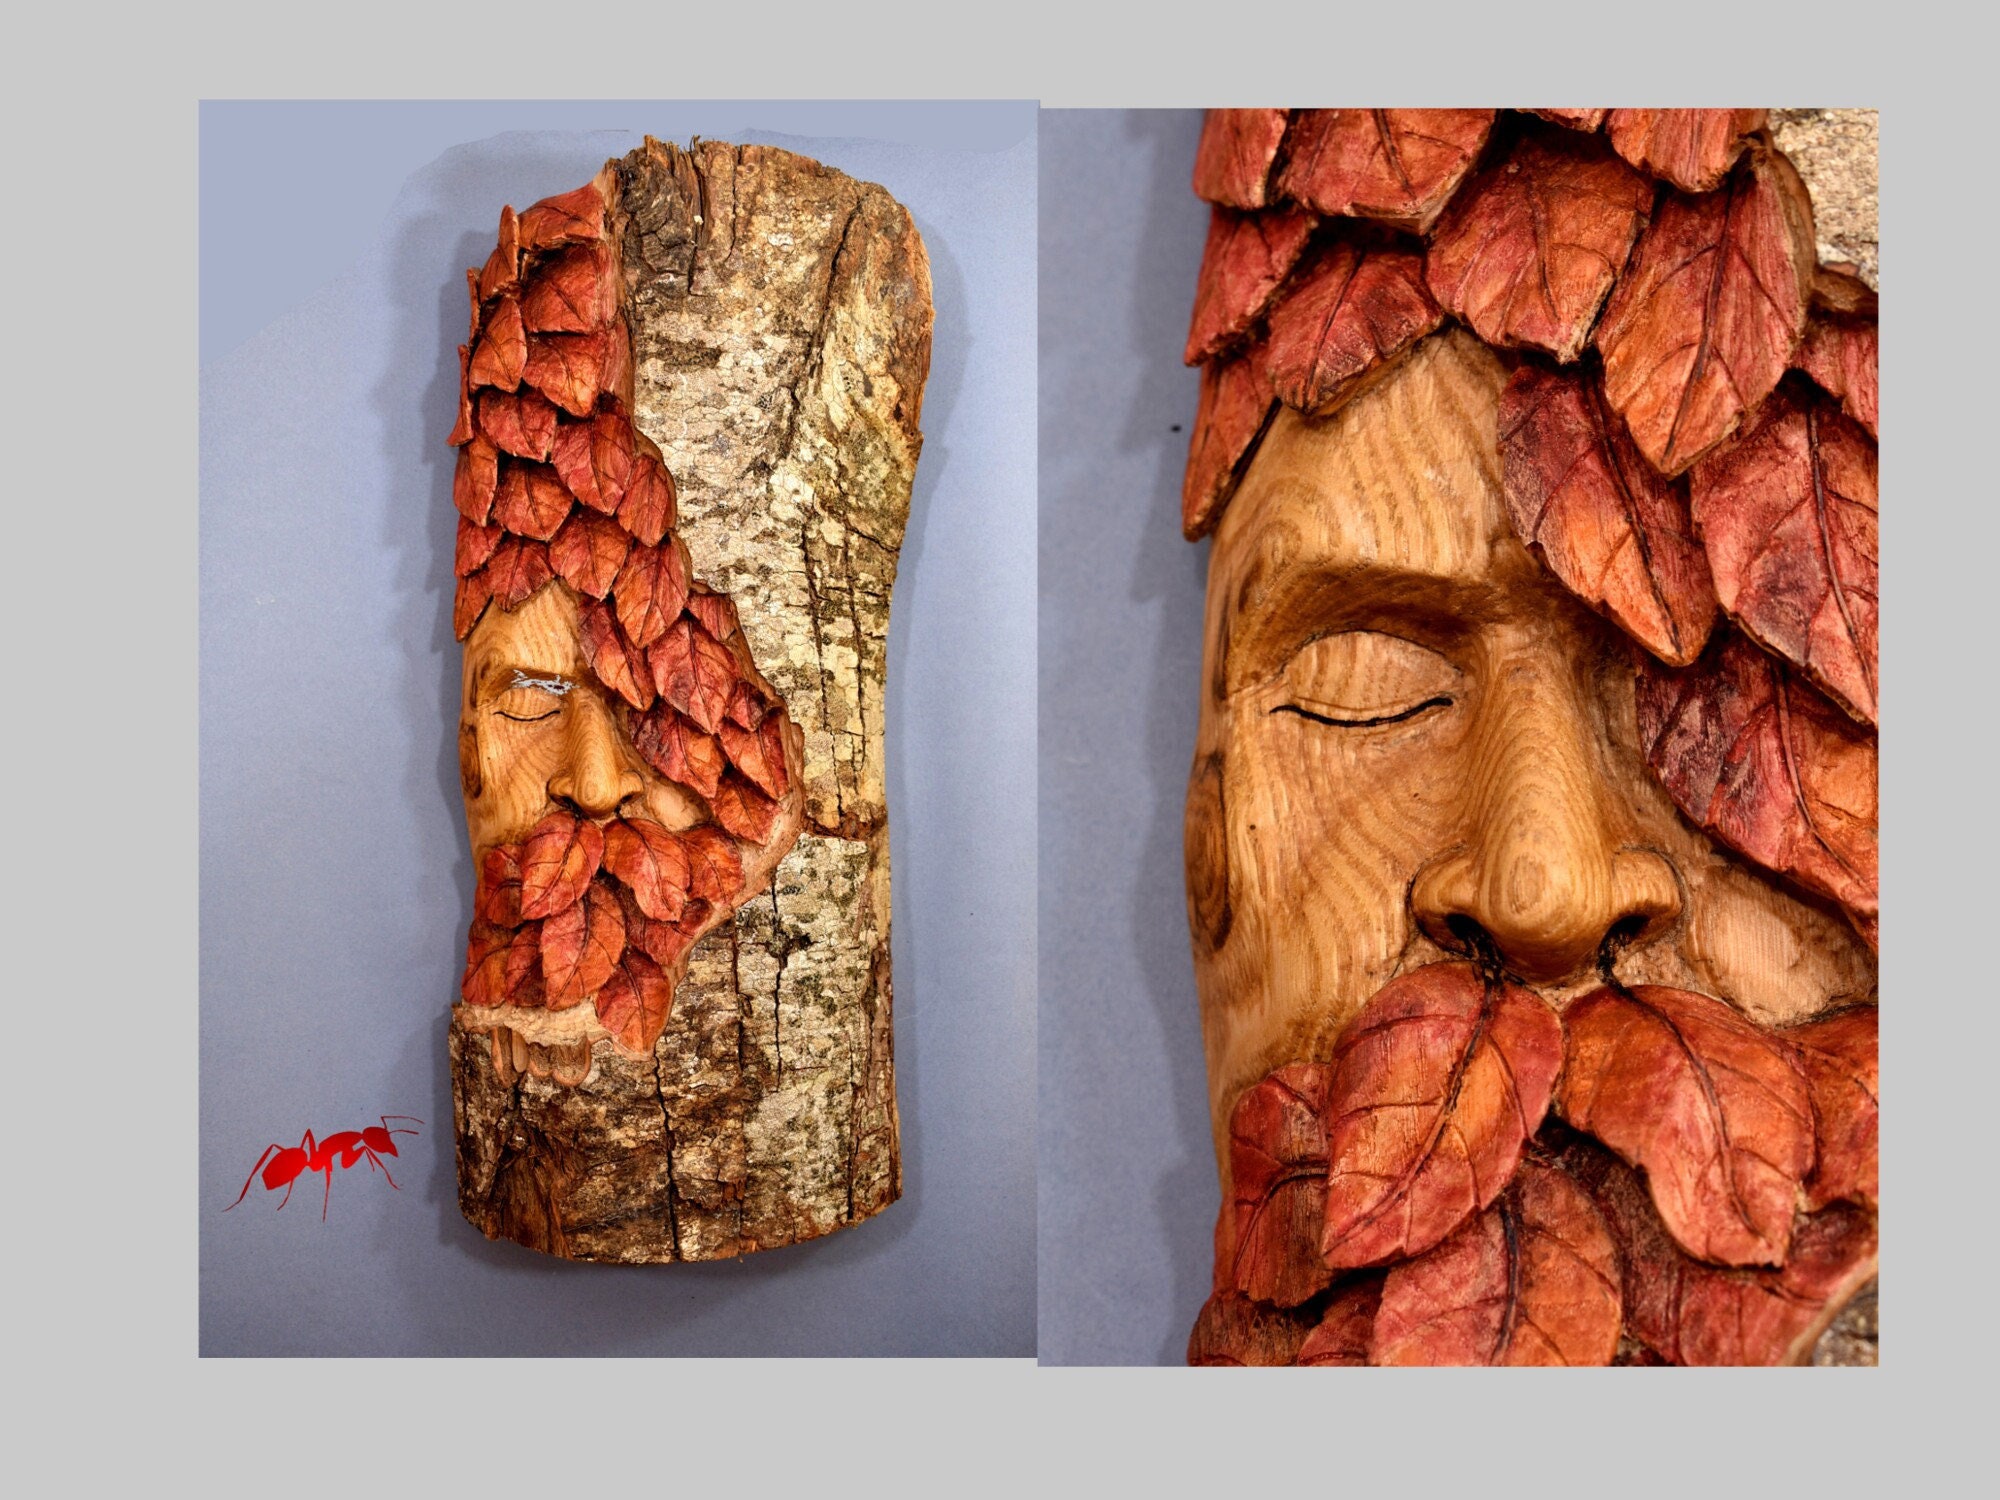 Relief Carving Wood Spirits - Revised Edition